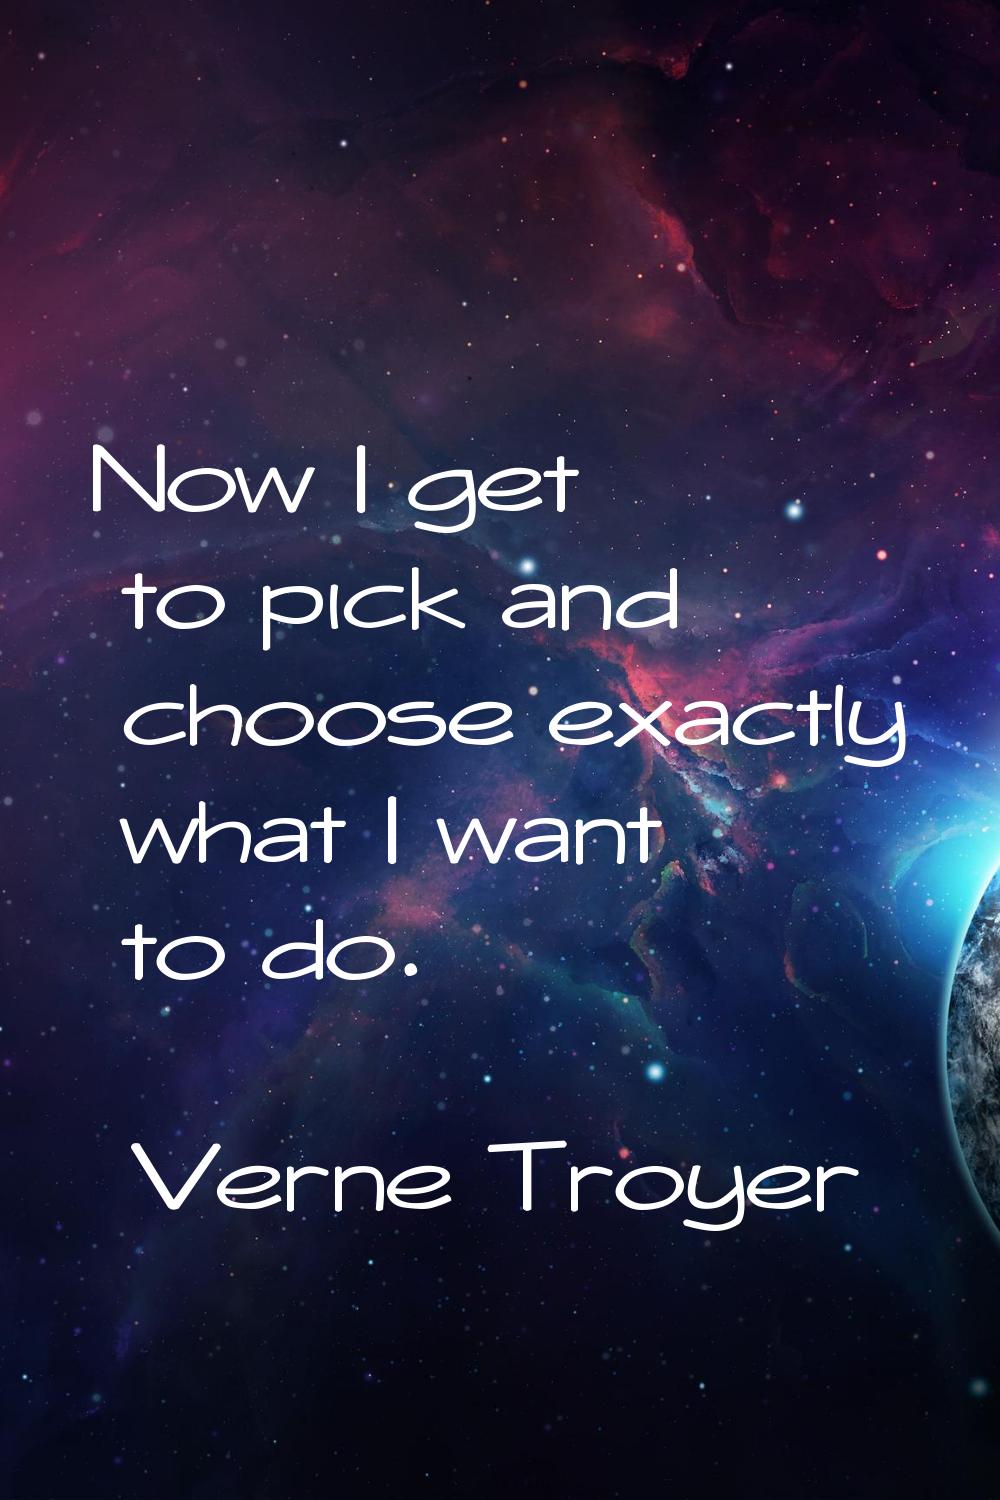 Now I get to pick and choose exactly what I want to do.